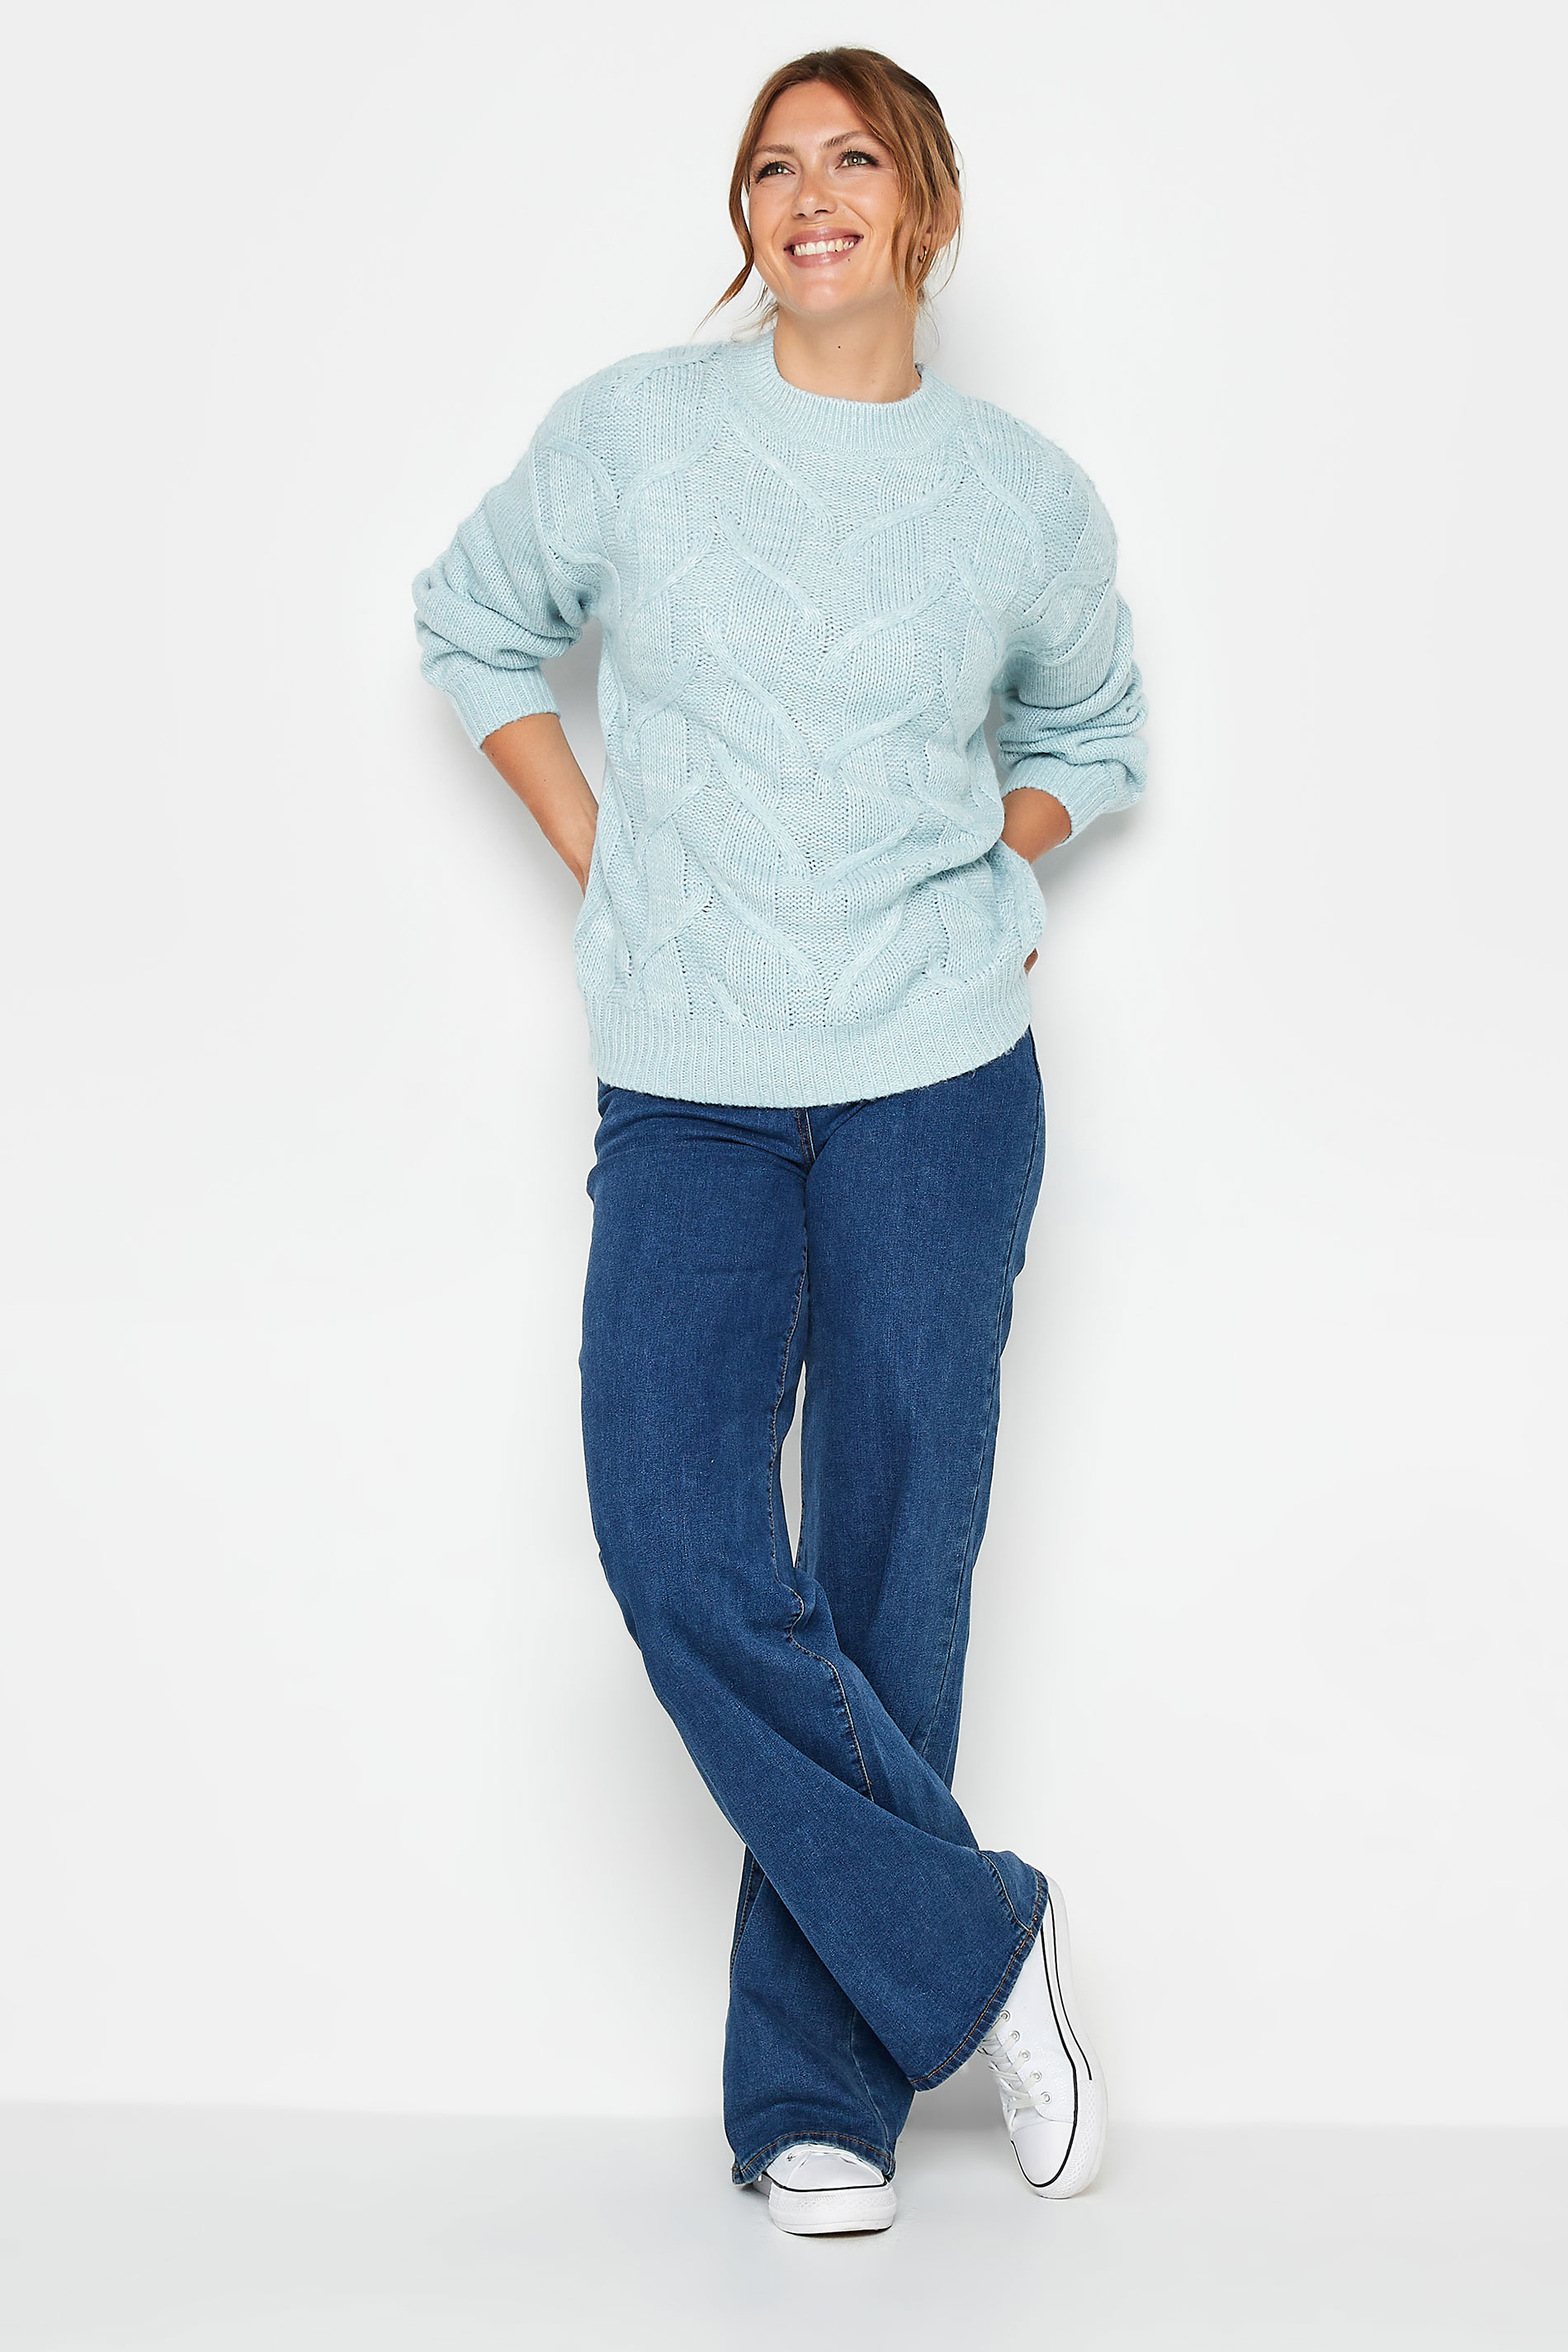 LTS Tall Light Blue Chunky Cable Knit Jumper | Long Tall Sally 2